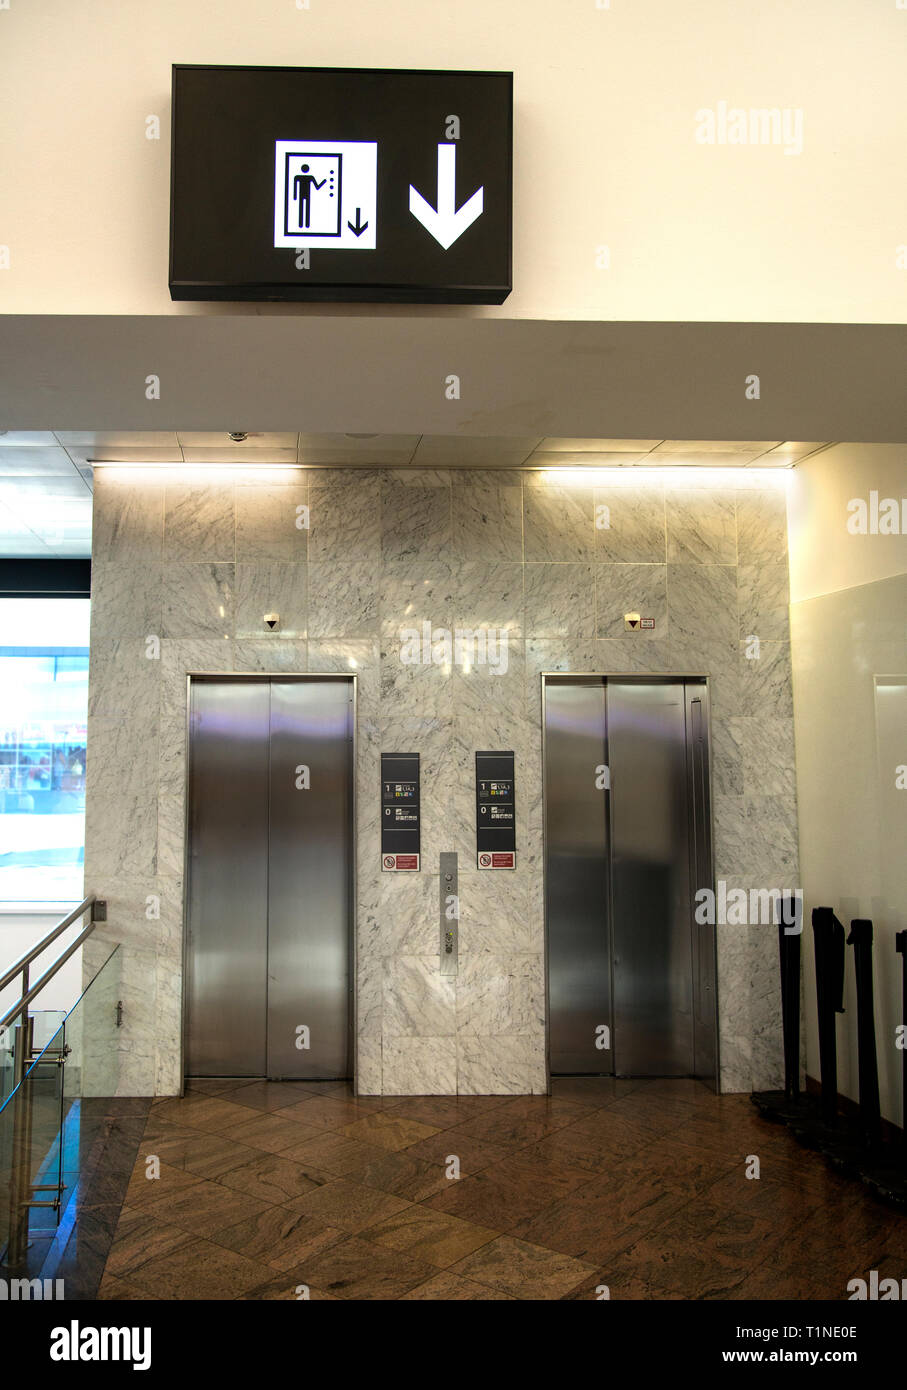 Elevators or lift in the airport with sign Stock Photo